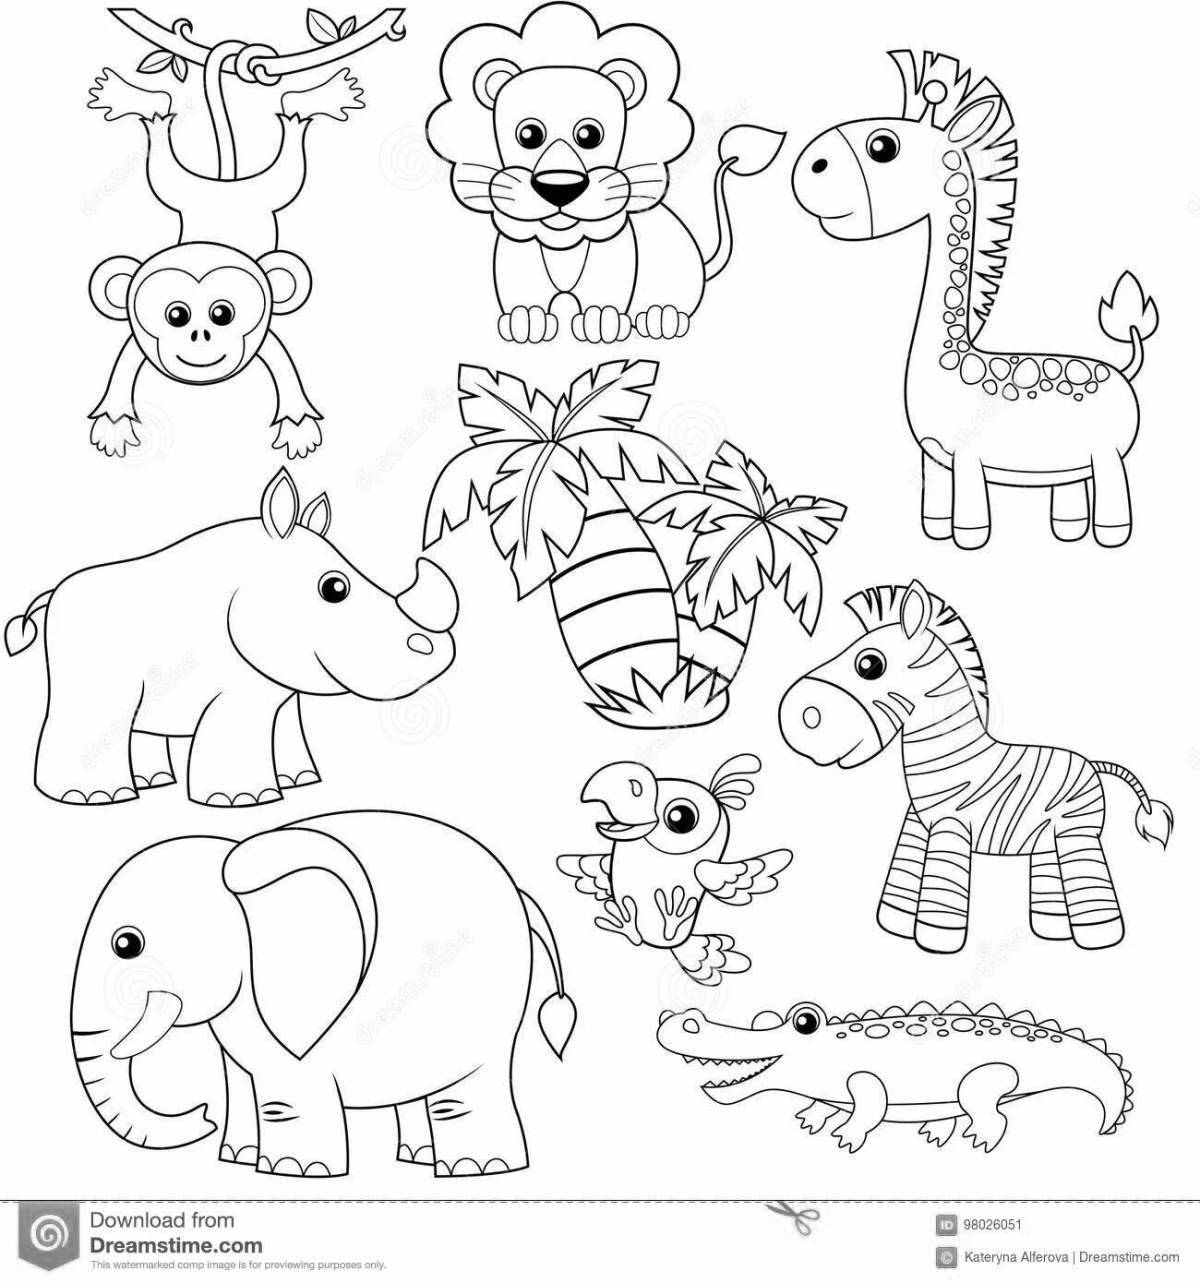 Adorable zoo coloring book for 3-4 year olds